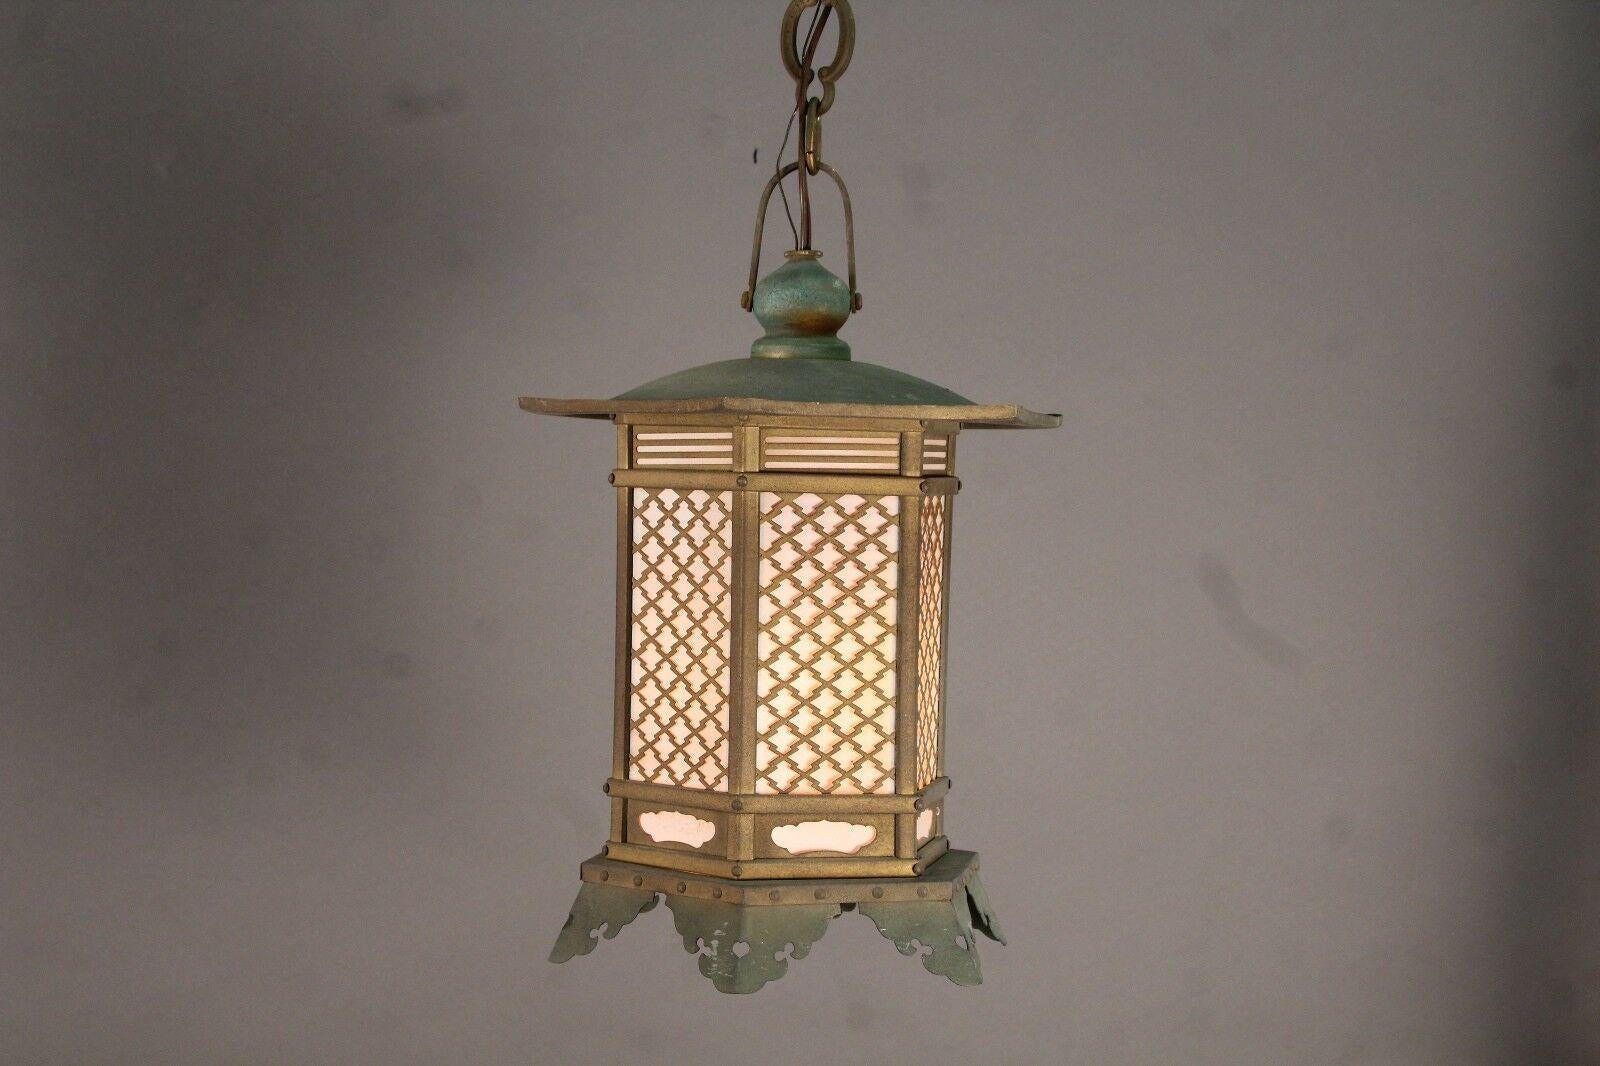 Rare find

Japan, a handsome high quality pair of tall bronze and copper lantern form Light fixtures, original and with new rewiring,internal socket, and paper liners , circa 1930s.  Immediately installable.

They come complete with hanging